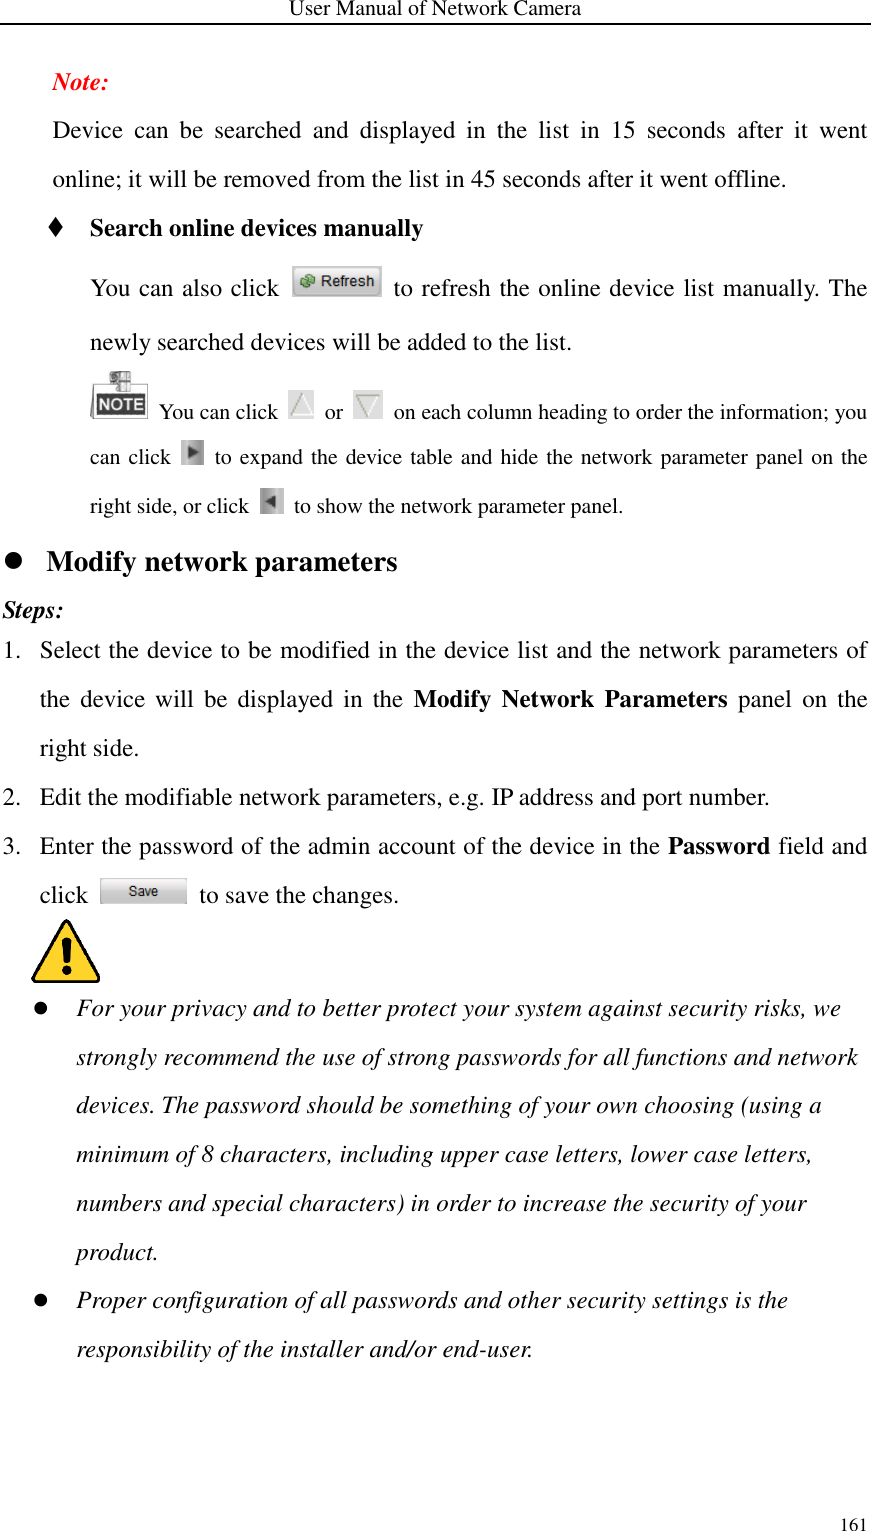 User Manual of Network Camera 161  Note: Device  can  be  searched  and  displayed  in  the  list  in  15  seconds  after  it  went online; it will be removed from the list in 45 seconds after it went offline.  Search online devices manually You can also click    to refresh the online device list manually. The newly searched devices will be added to the list.    You can click    or    on each column heading to order the information; you can click    to expand the device table and hide the network parameter panel on the right side, or click    to show the network parameter panel.  Modify network parameters Steps: 1. Select the device to be modified in the device list and the network parameters of the device will be displayed in  the  Modify Network  Parameters  panel on the right side. 2. Edit the modifiable network parameters, e.g. IP address and port number. 3. Enter the password of the admin account of the device in the Password field and click    to save the changes.     For your privacy and to better protect your system against security risks, we strongly recommend the use of strong passwords for all functions and network devices. The password should be something of your own choosing (using a minimum of 8 characters, including upper case letters, lower case letters, numbers and special characters) in order to increase the security of your product.  Proper configuration of all passwords and other security settings is the responsibility of the installer and/or end-user. 